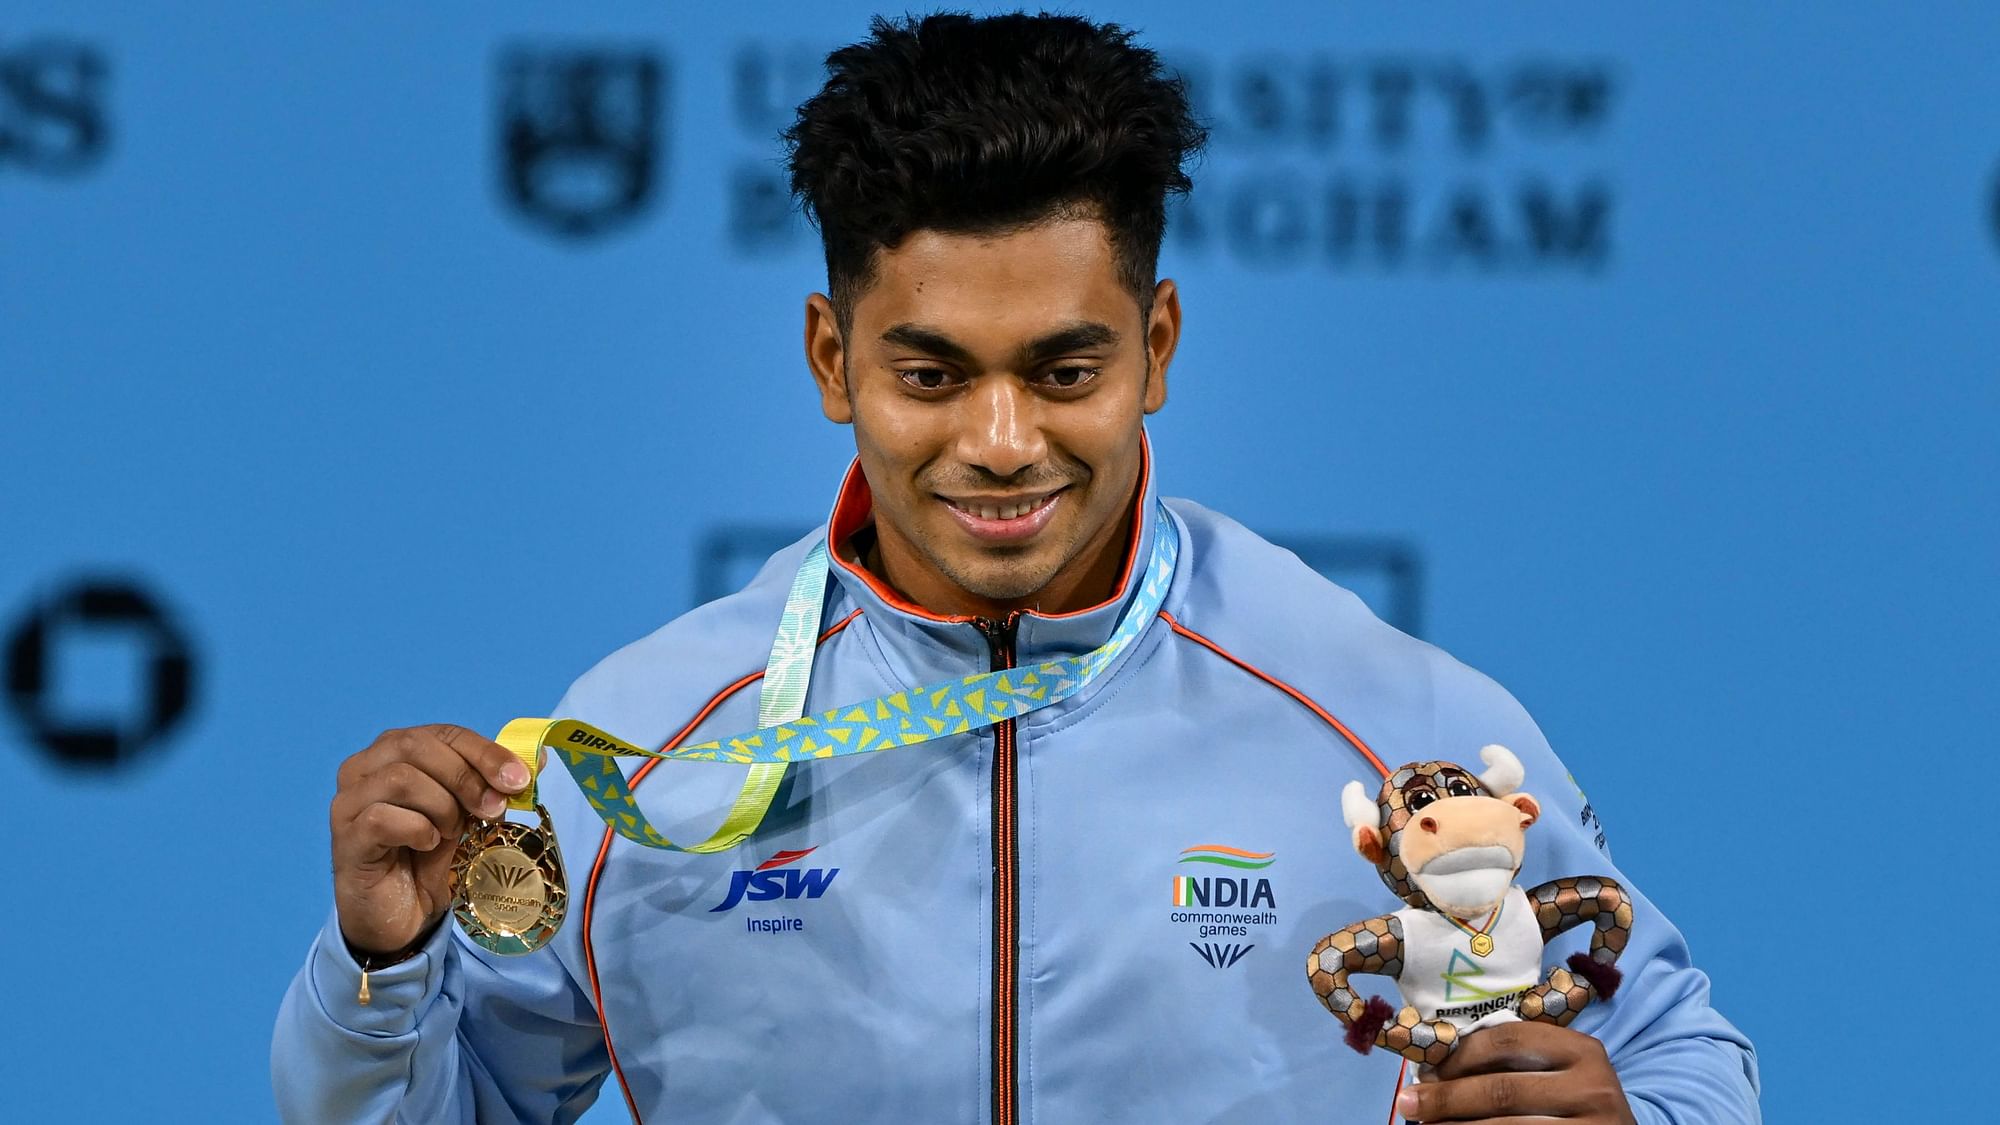 CWG 2022 Live, Day 3 Jeremy and Achinta Weightlifting Gold, India Secure Victories in Womens Cricket and Mens Hockey